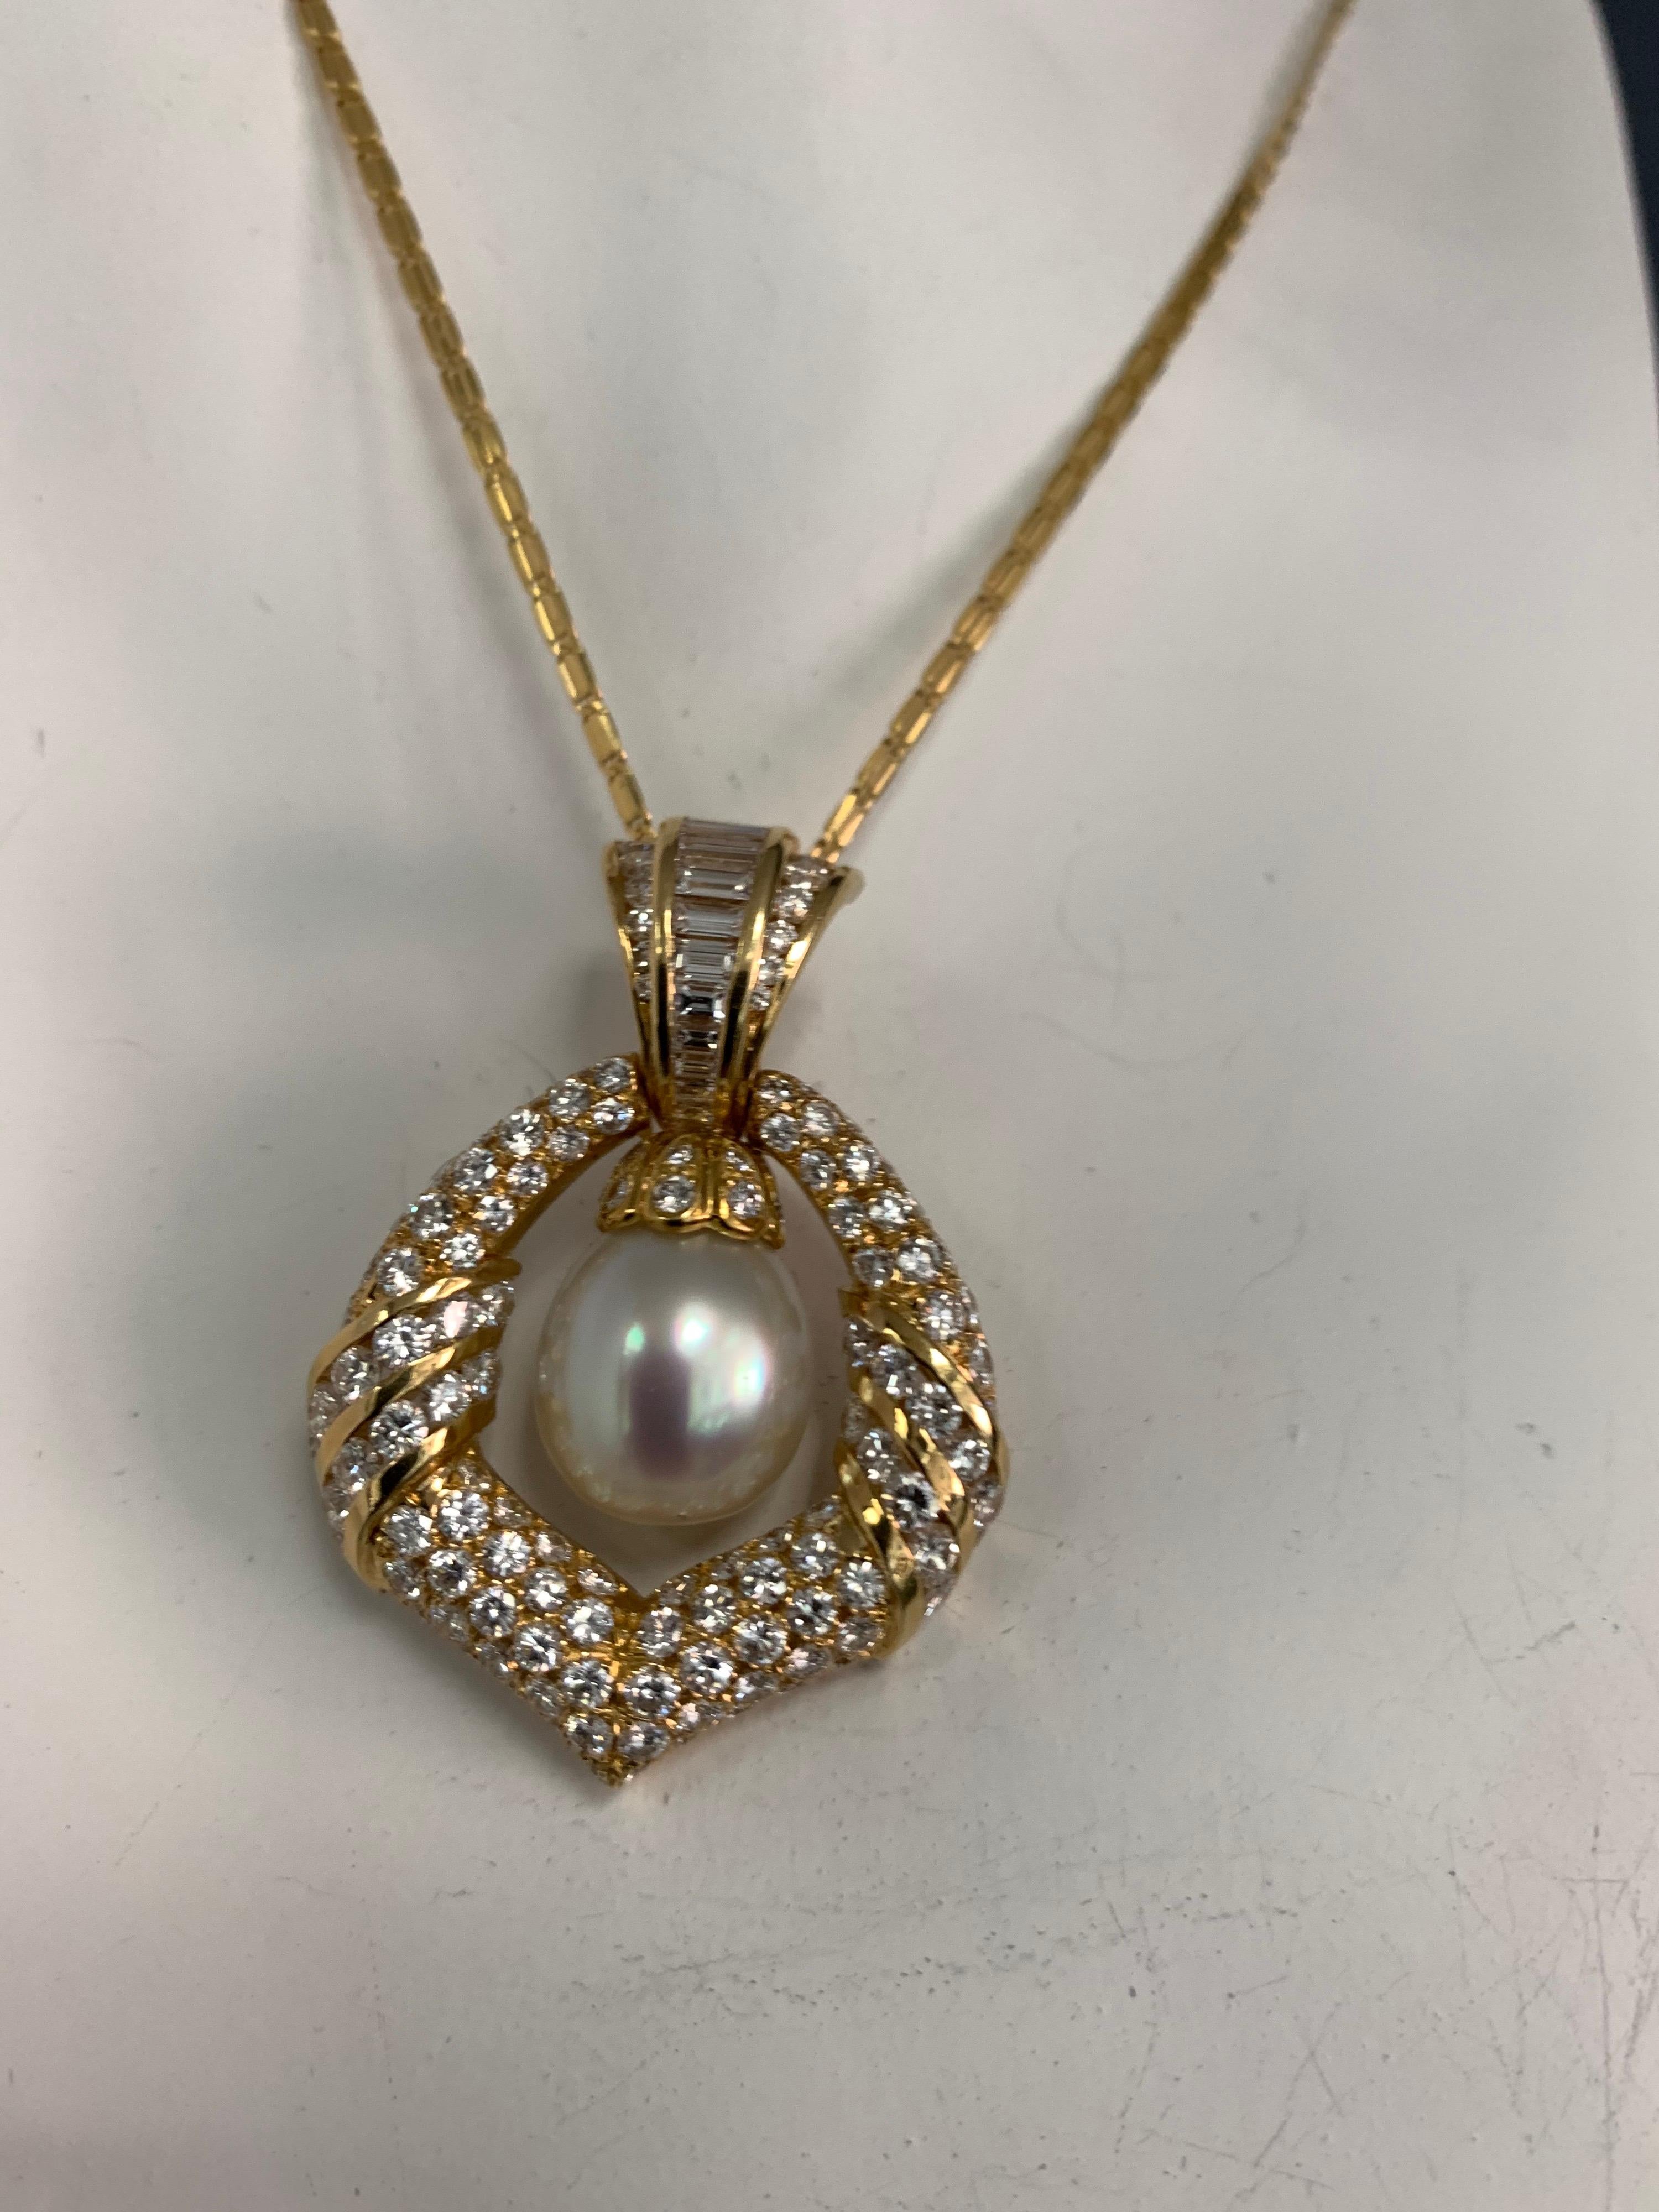 Retro Gold Necklace 7.5 Carat Natural Round Colorless Diamond & Pearl circa 1950 In Good Condition For Sale In Los Angeles, CA